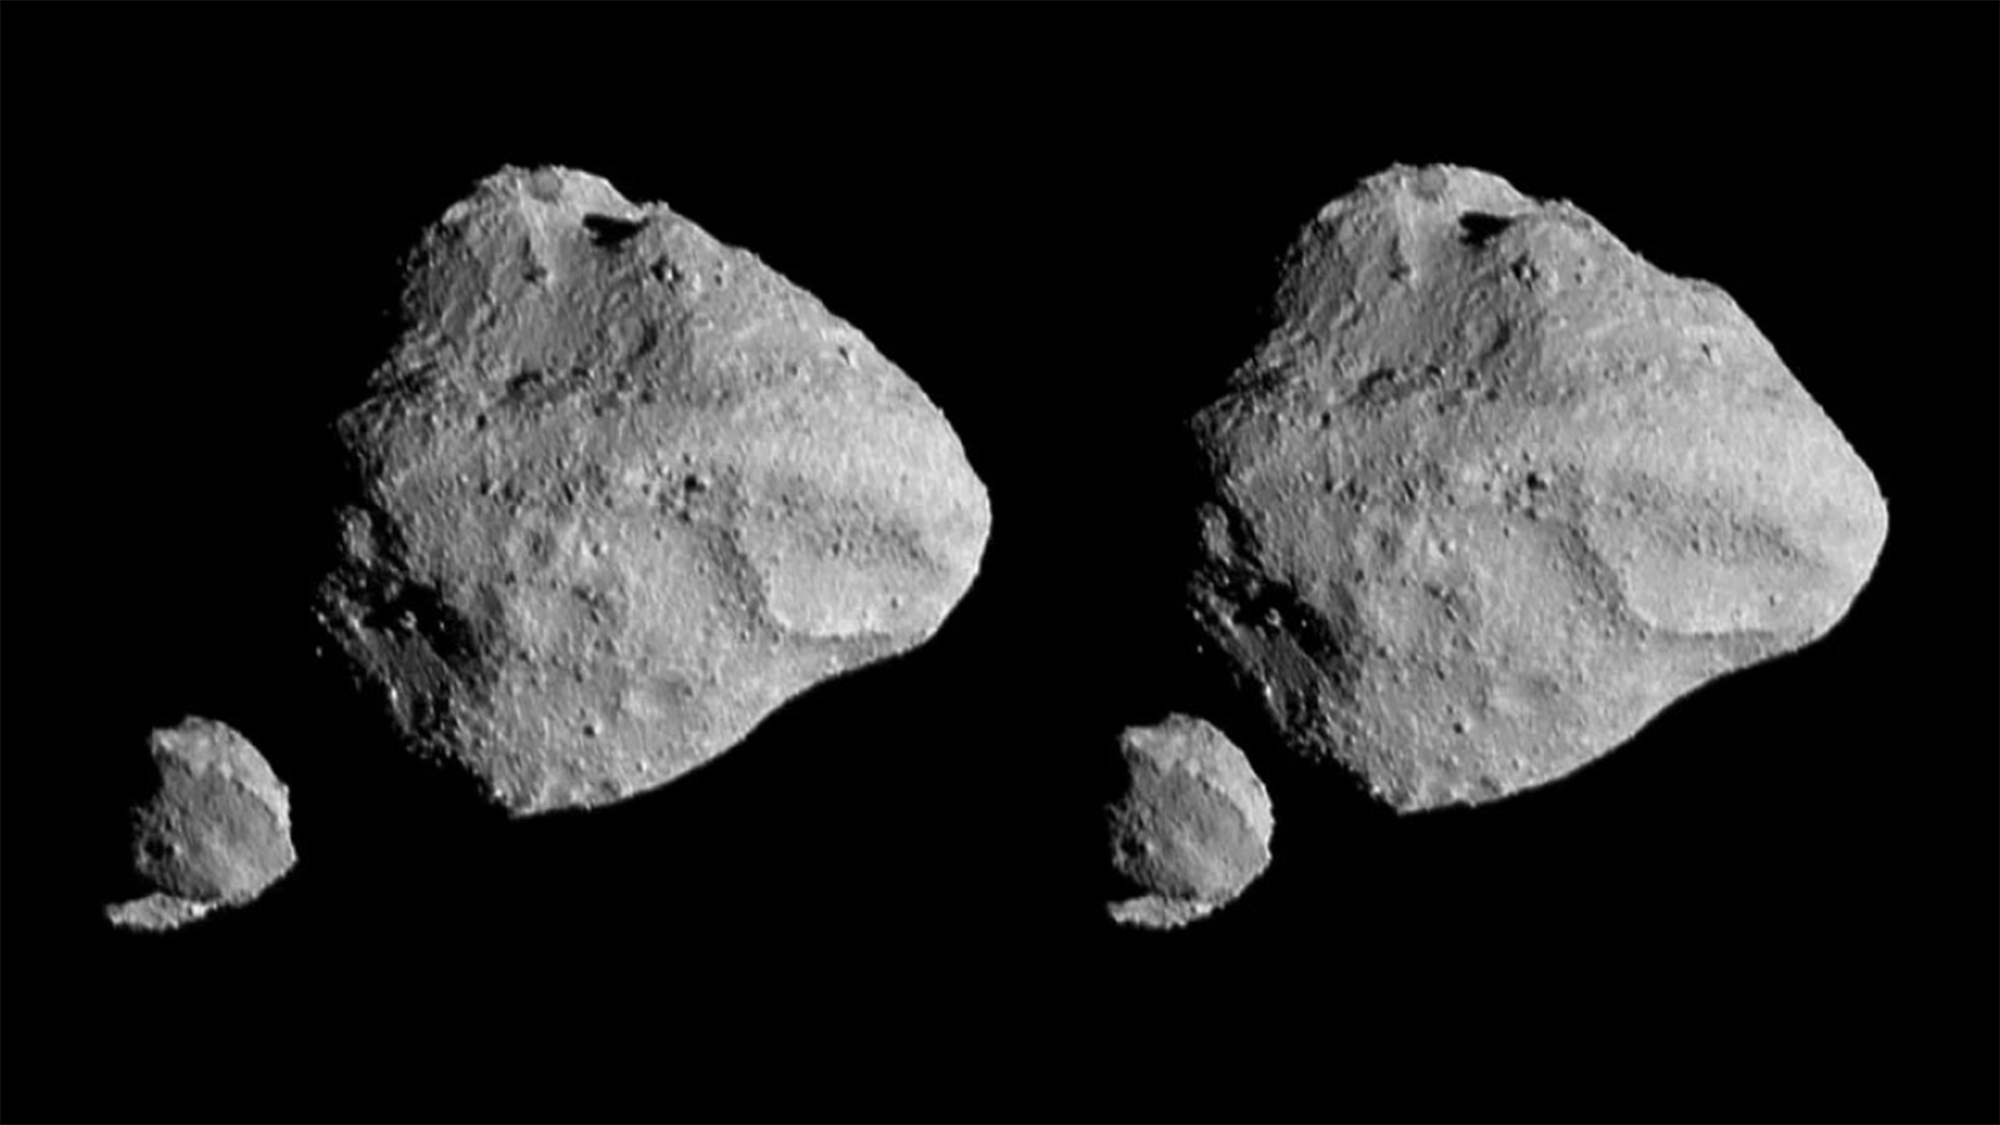 'Lucy's Baby' asteroid is only about 2 to 3 million years old